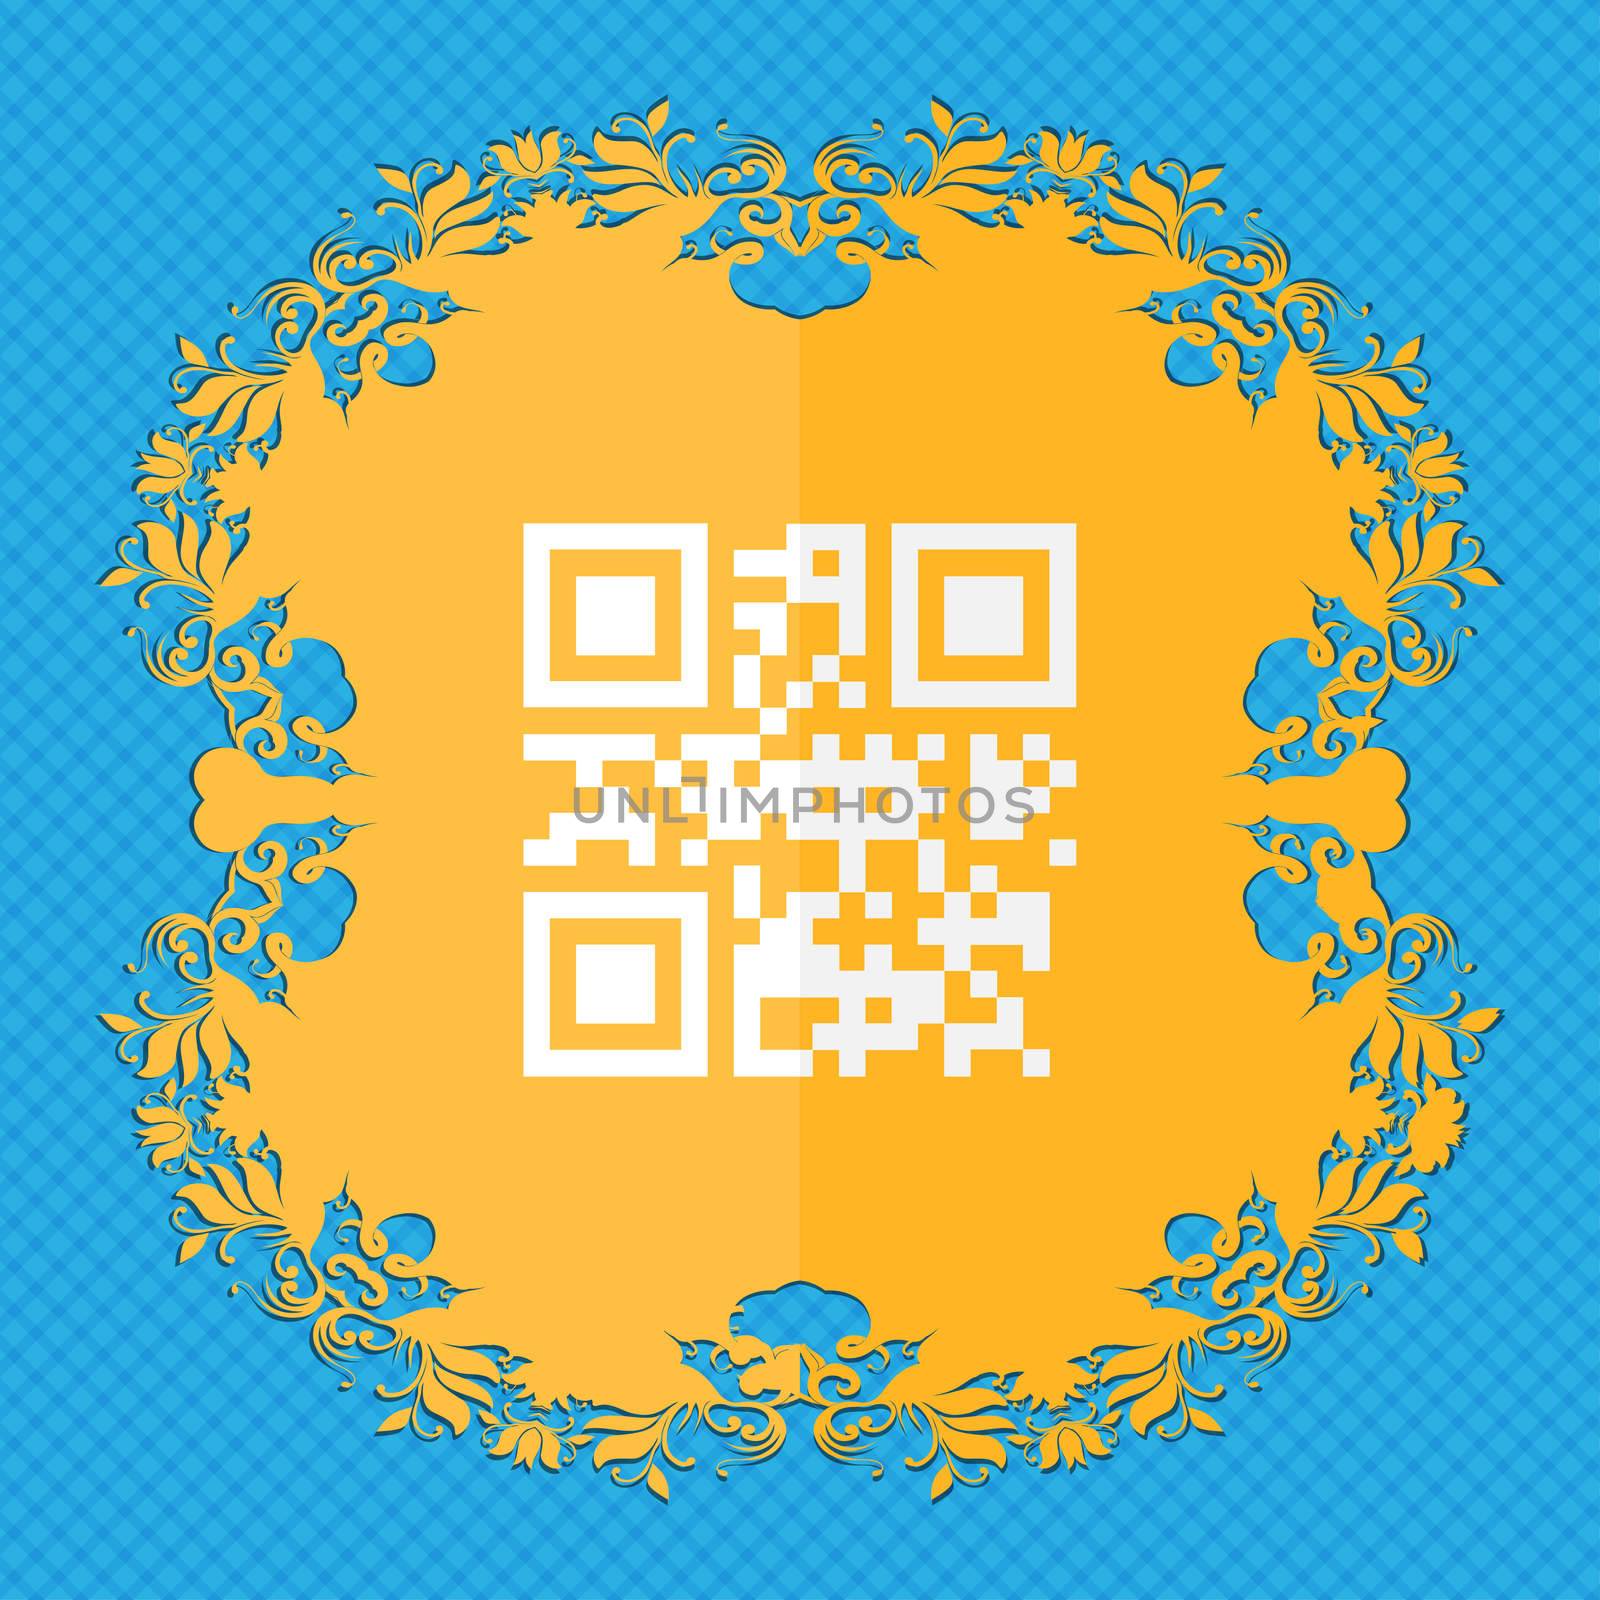 Qr code. Floral flat design on a blue abstract background with place for your text. illustration